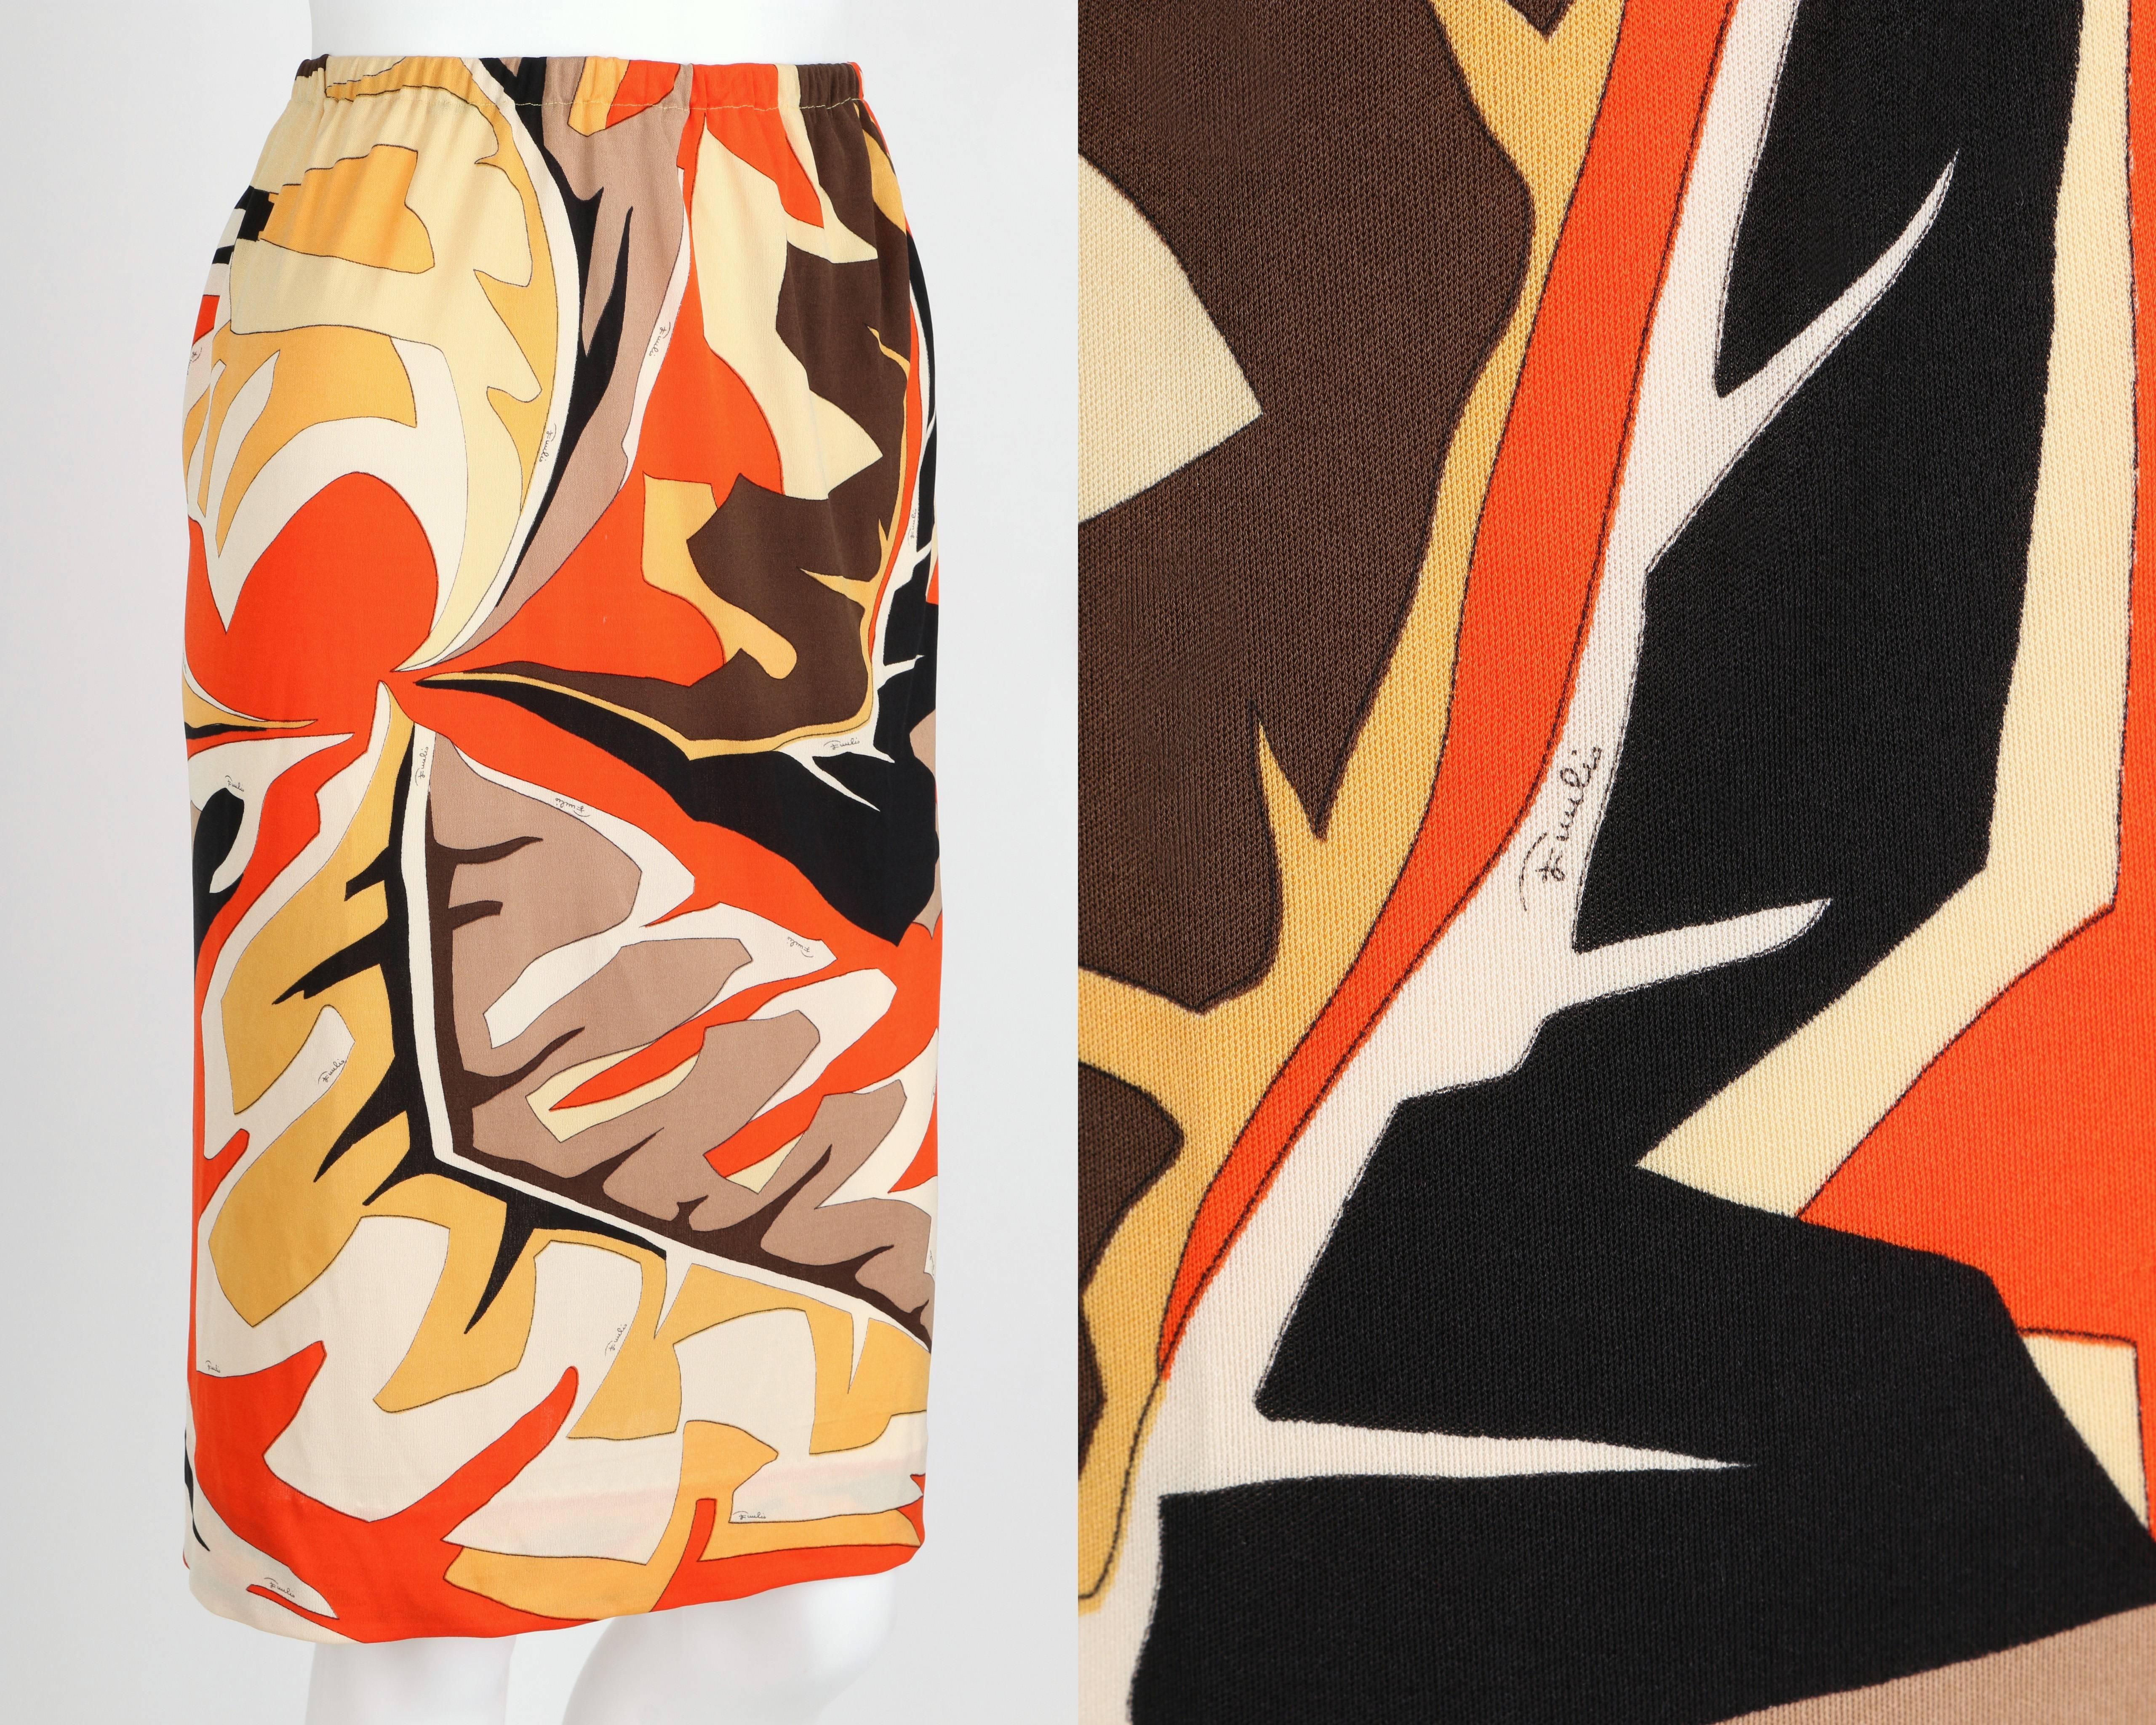 Vintage c.1960's Emilio Pucci African leaf signature print silk jersey skirt in shades of orange, yellow, brown and ivory. Inspired by his personal excursions to Africa. Decorative leaf border on left hip and back seam. Elastic waistband. Has been